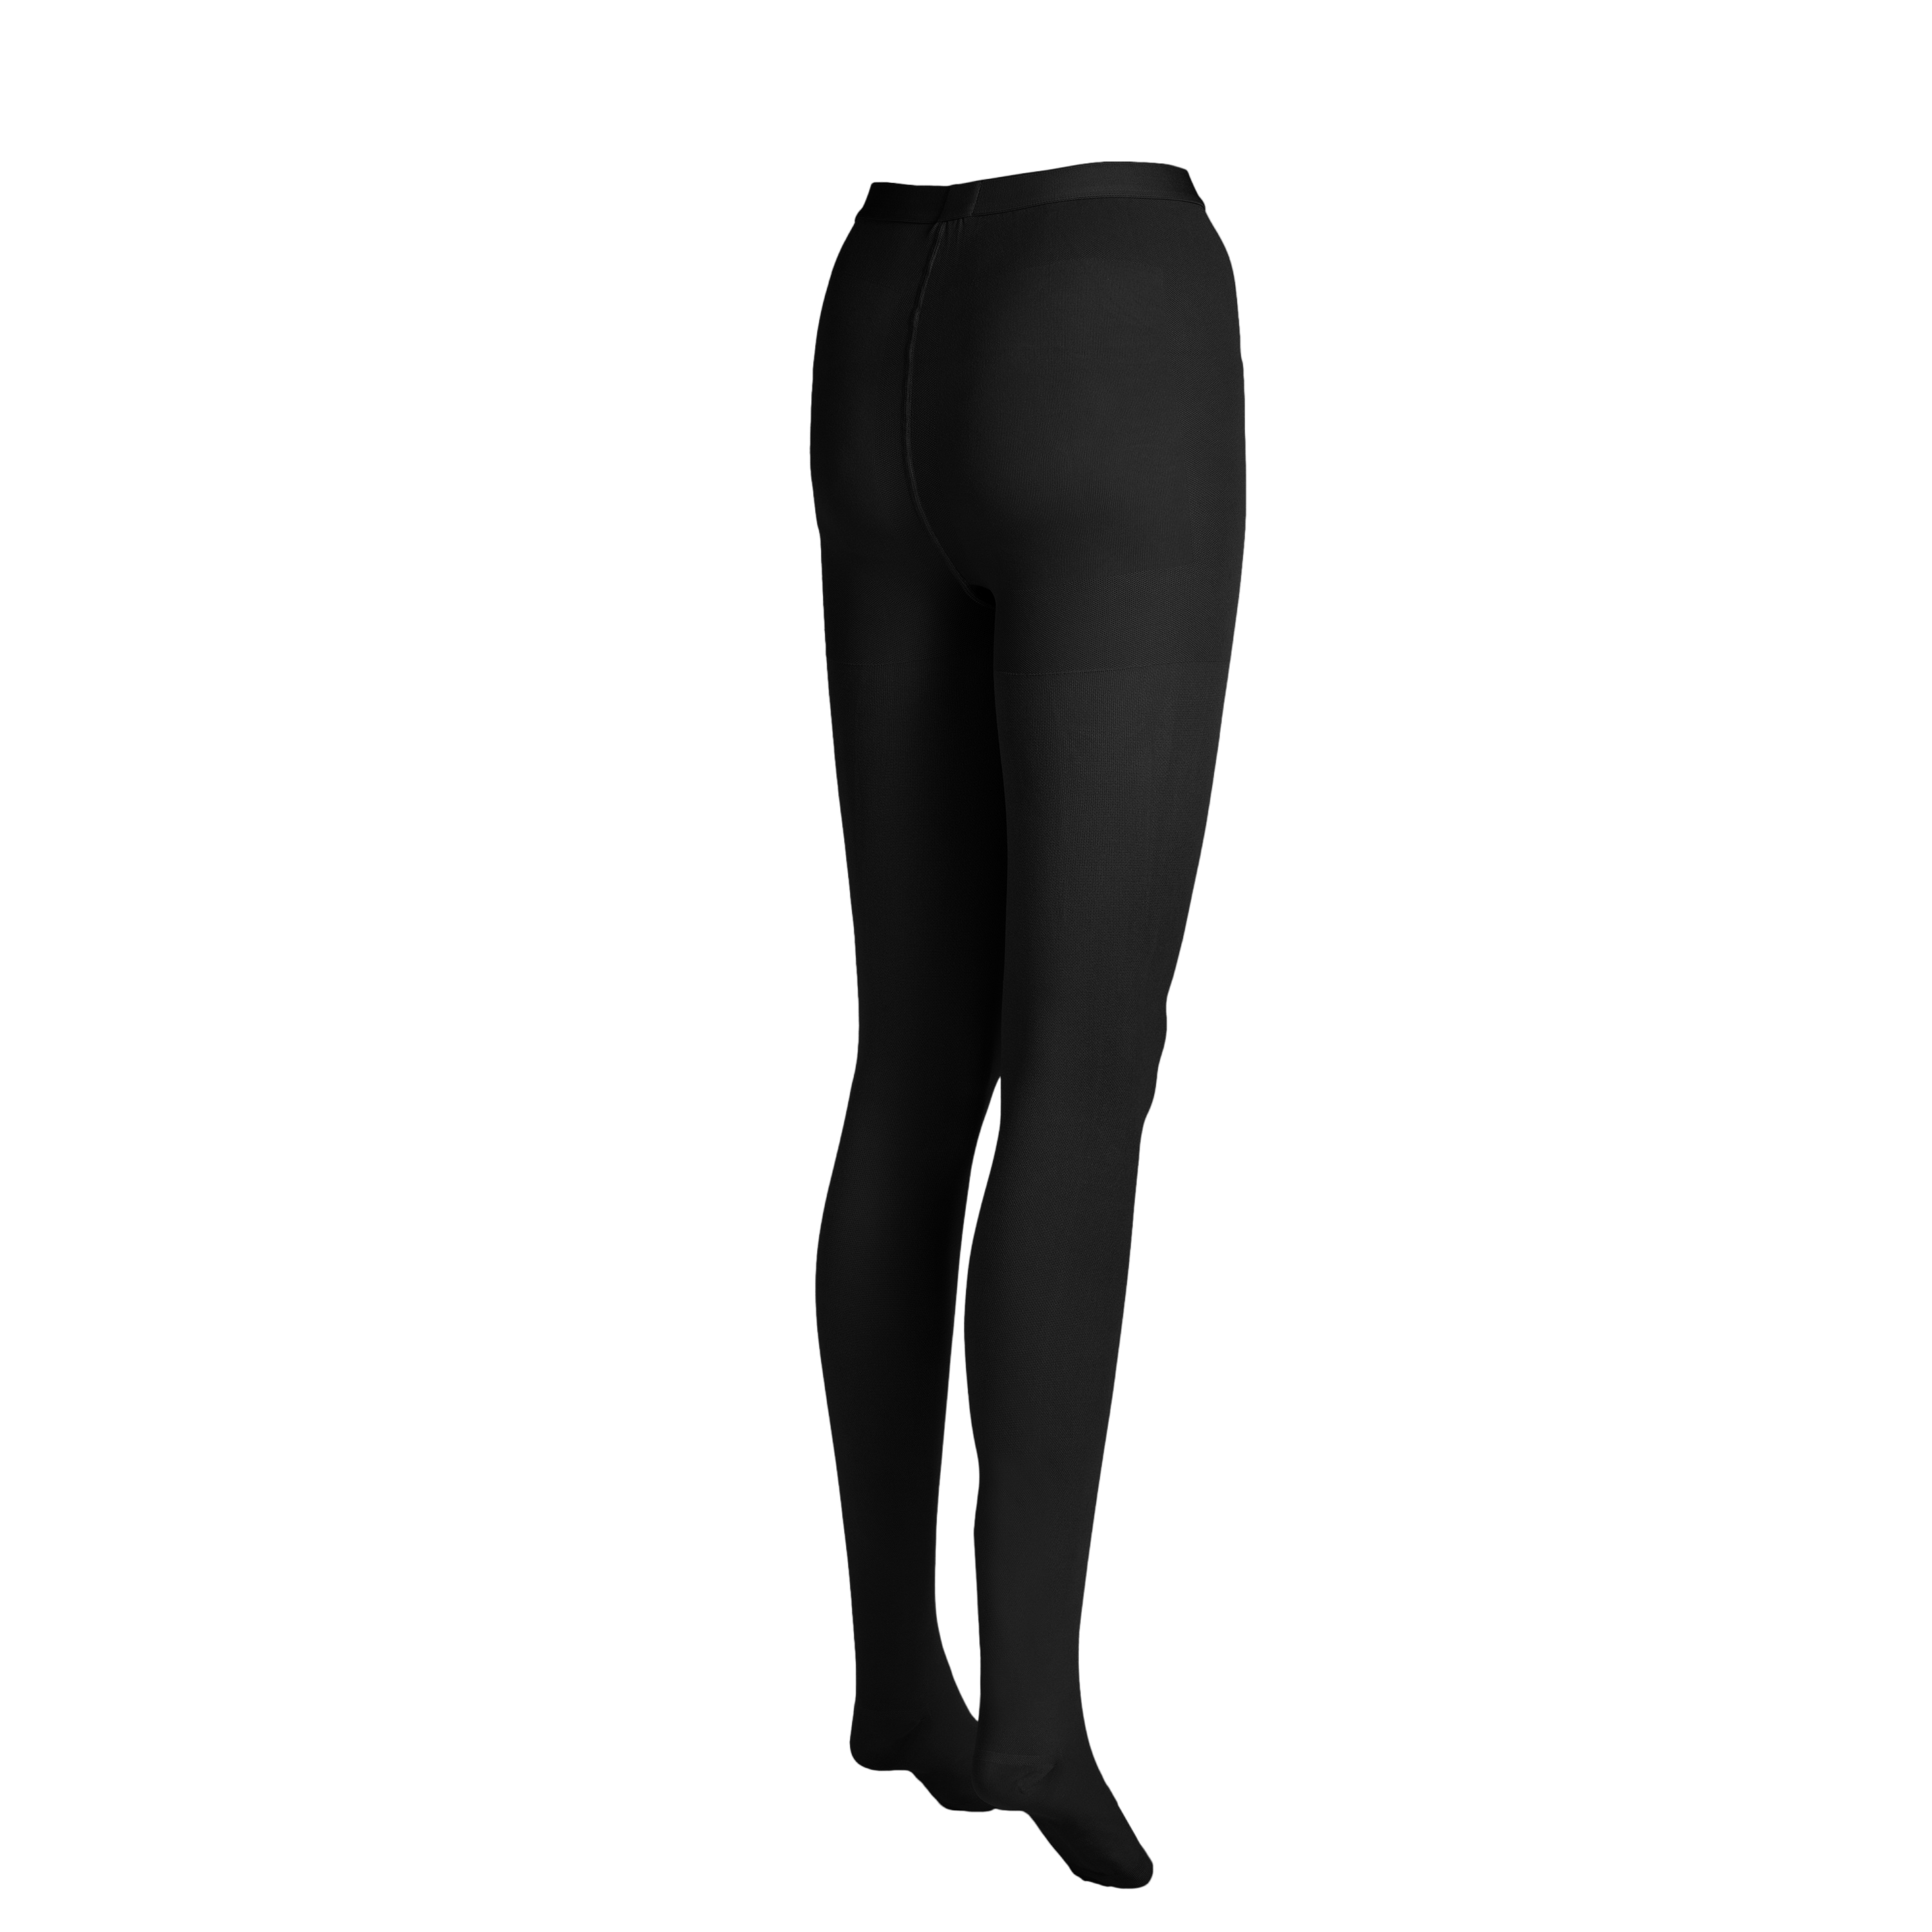 Compression Tights for Women 20-30 mmHg for Varicose Veins - Black, Small 